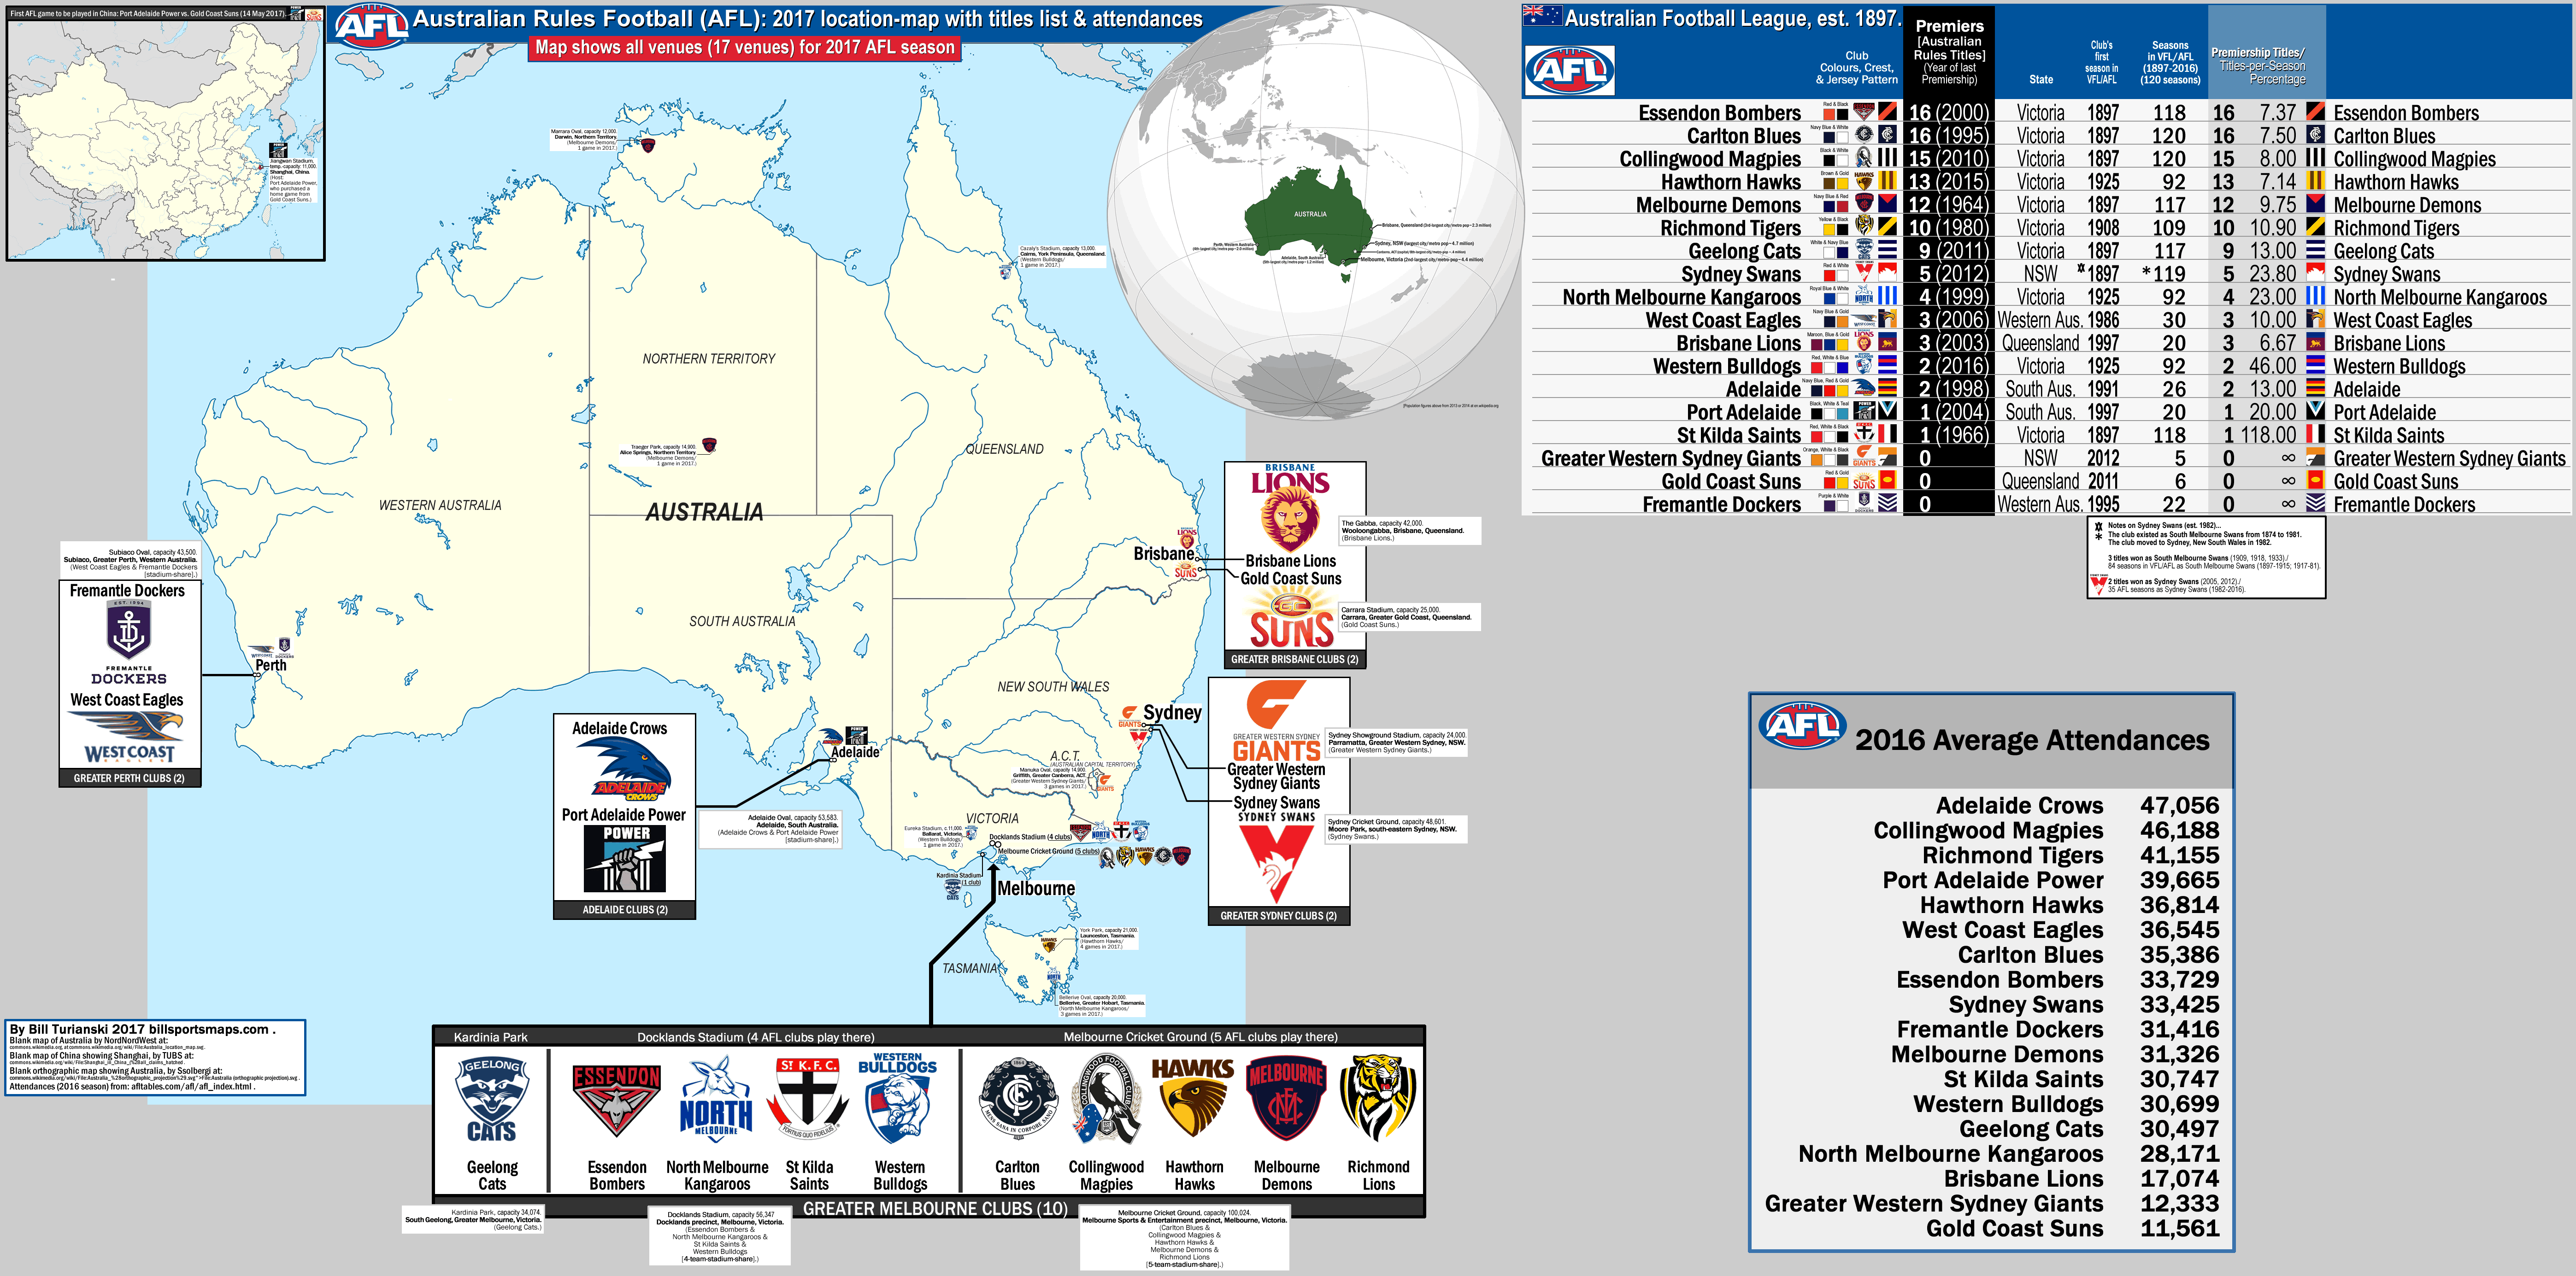 fotografering lineær Wetland Australian rules football – the Australian Football League (AFL), 2017  location-map, with map showing all venues (17 venues) for 2017 AFL season;  plus 2016 attendance figures & titles list./+ Illustration for the